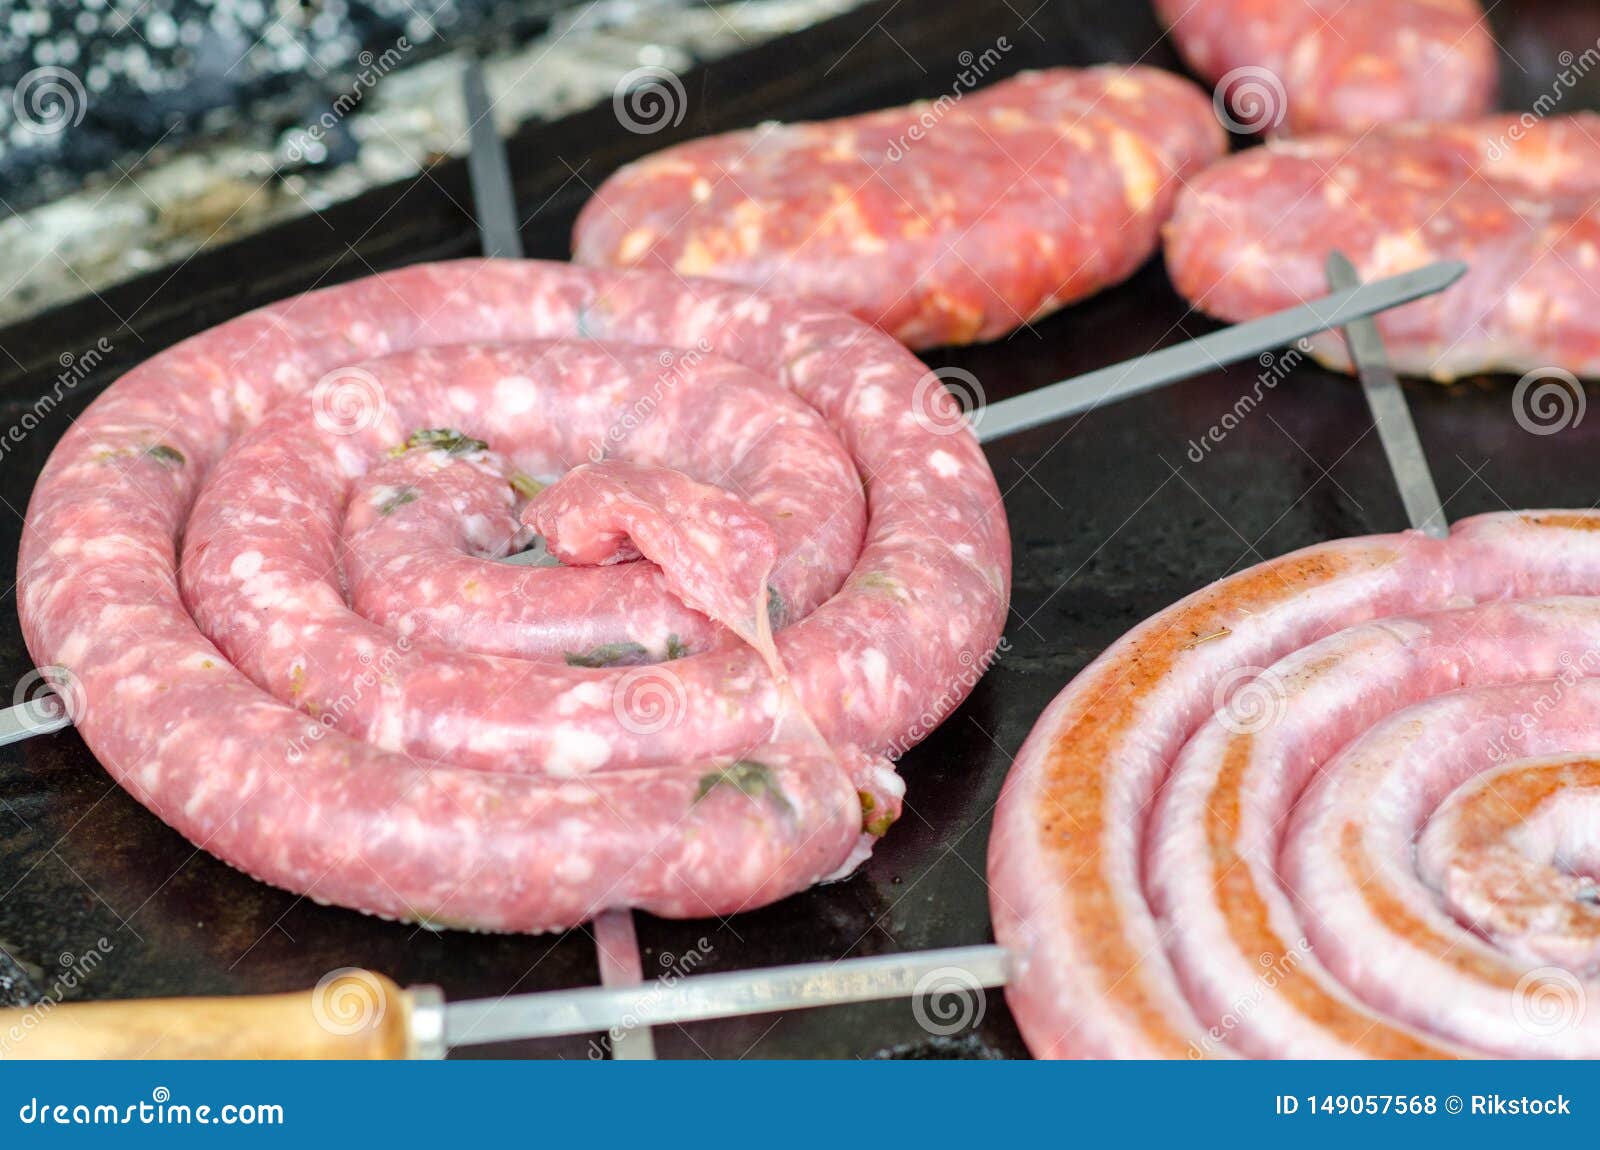 the sausage browned on the barbecue